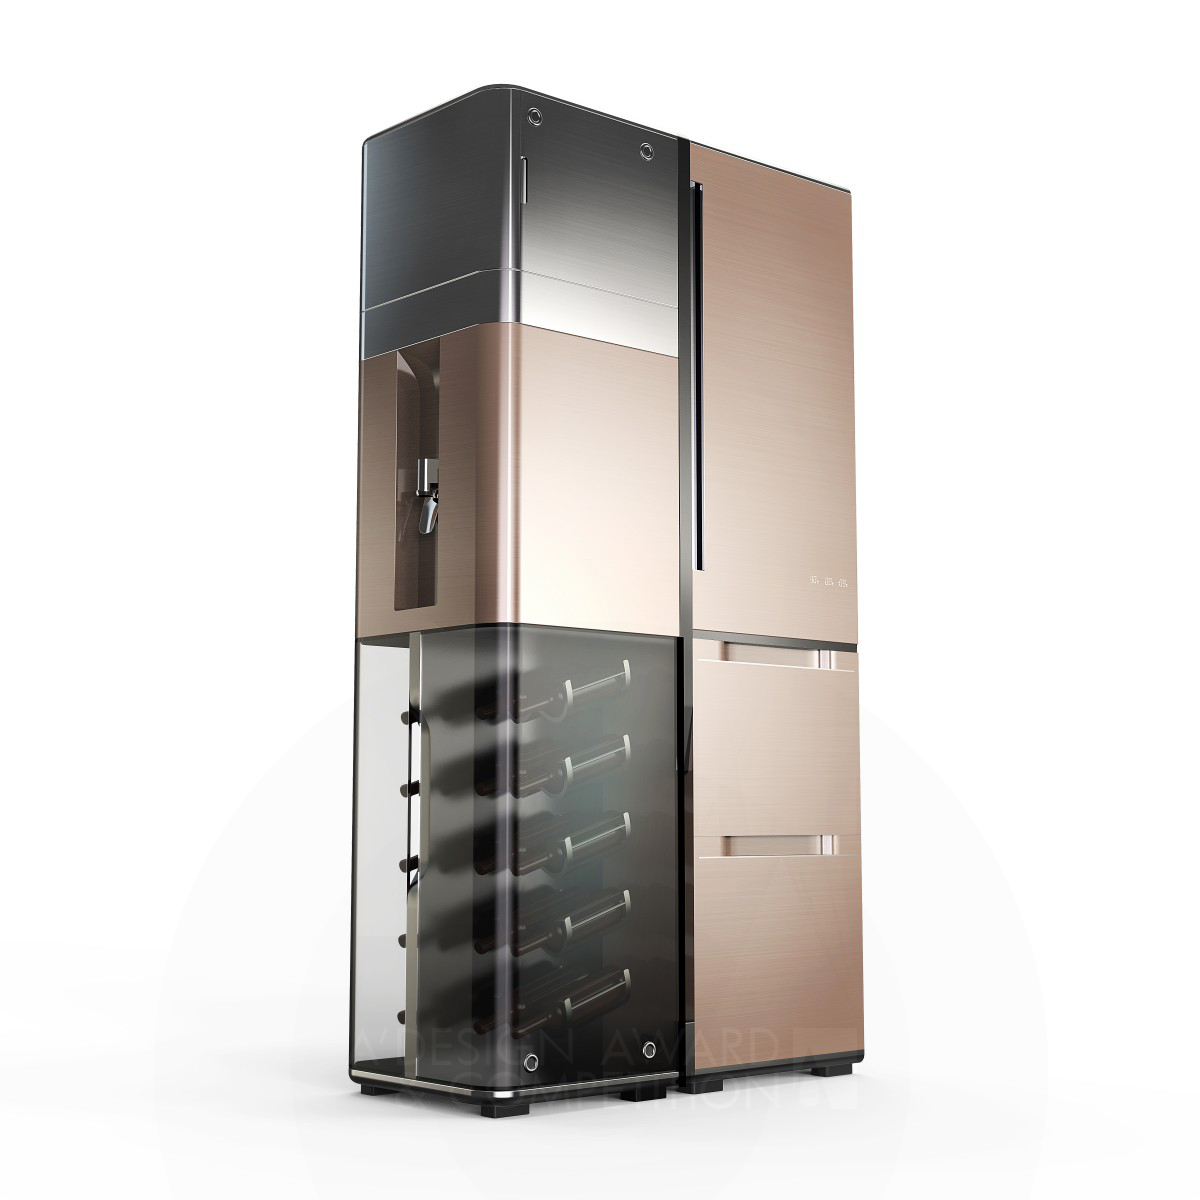 Shan Ni wins Silver at the prestigious A' Home Appliances Design Award with Polyhedral Refrigerator.